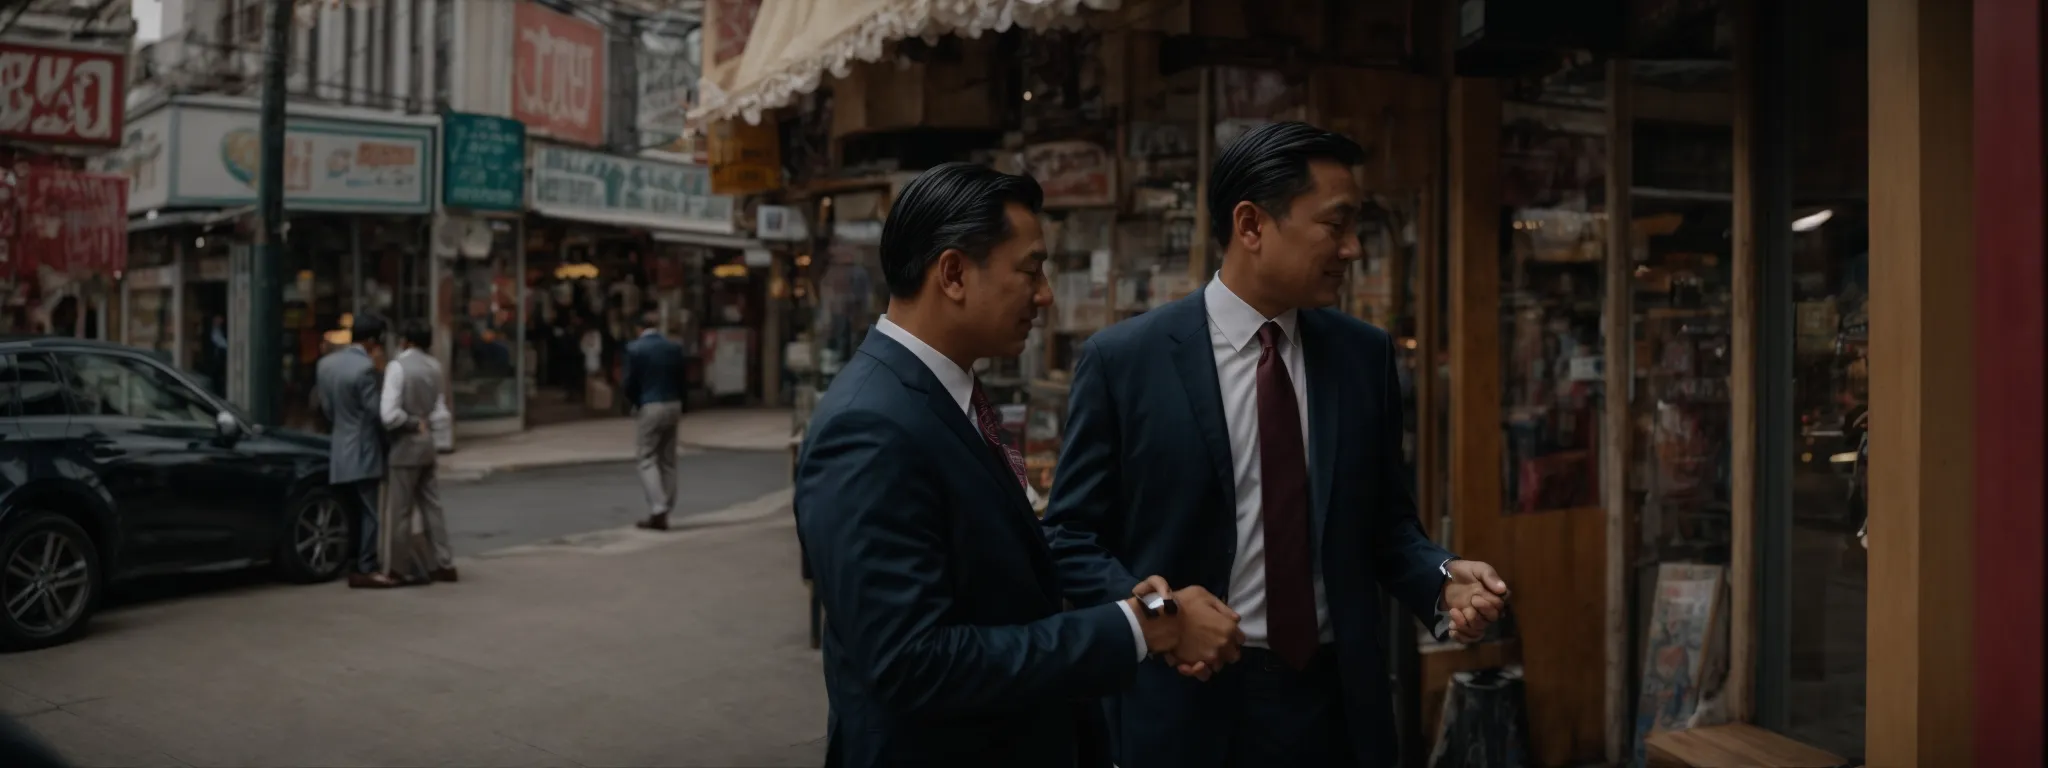 two business professionals shaking hands in front of their storefronts on a bustling local street.